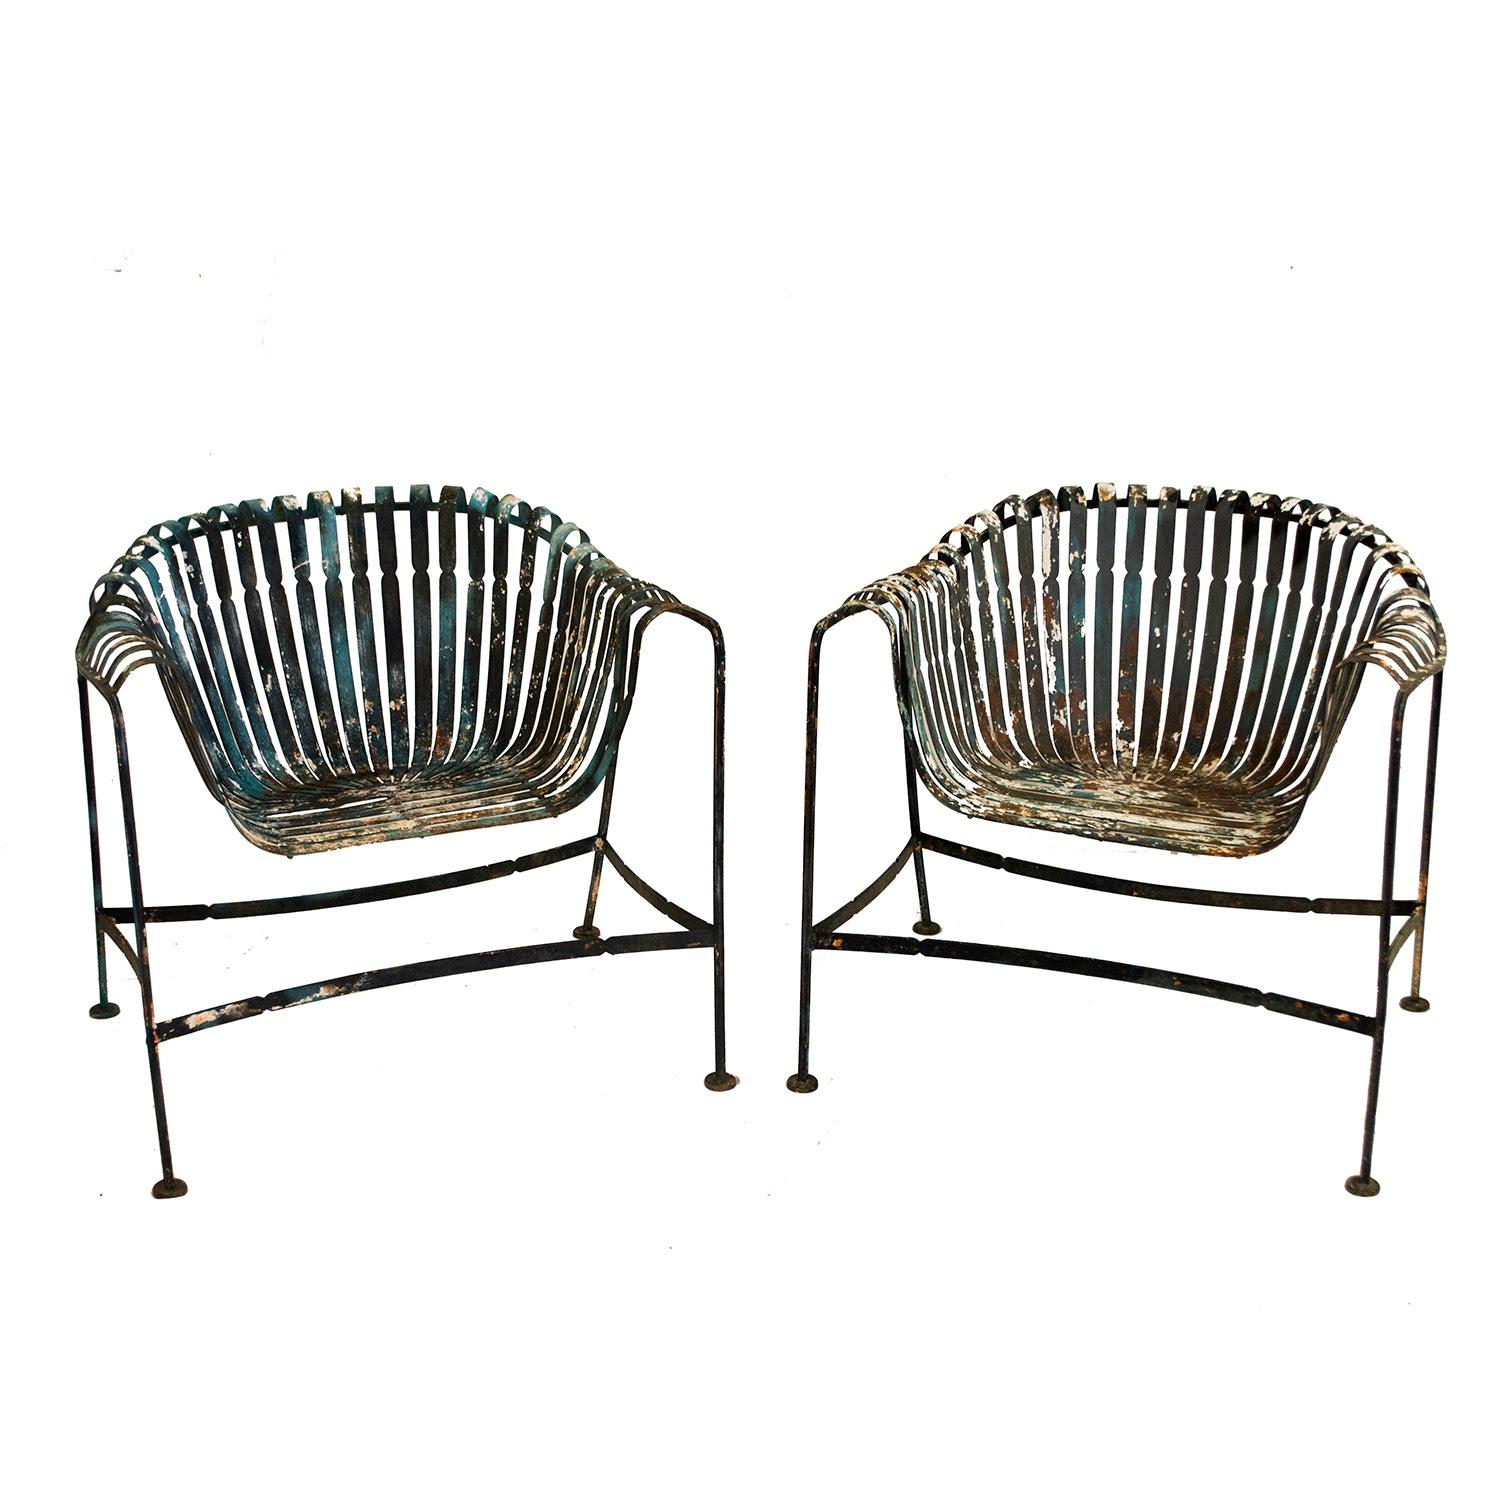 Metal Francois Carre Inspired French Garden Chairs by Woodard For Sale